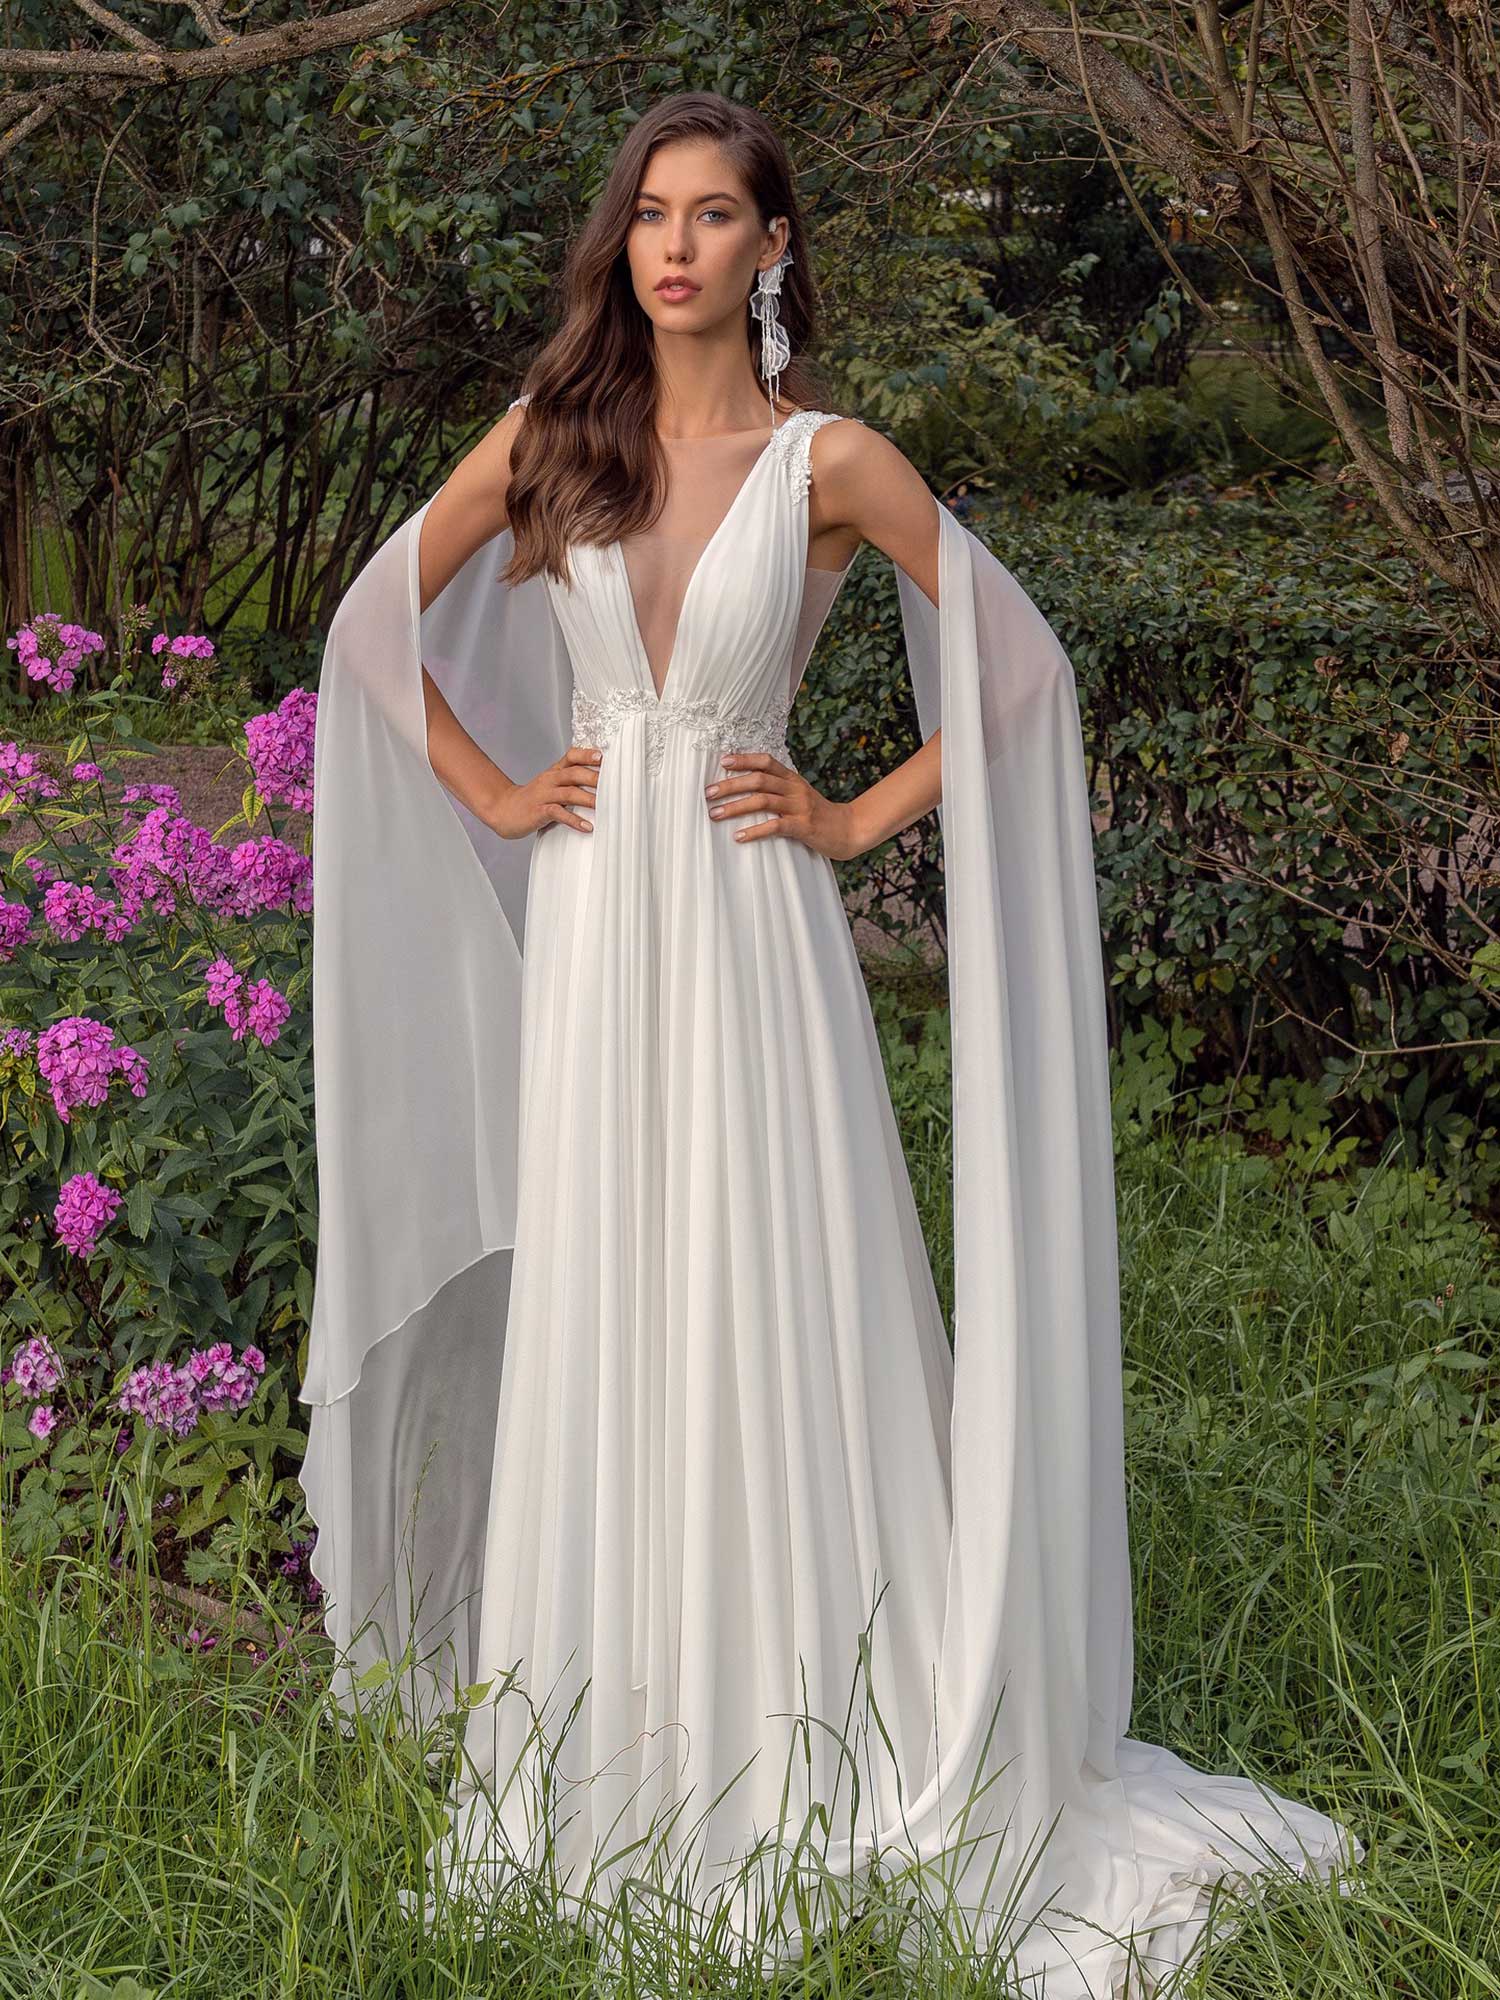 Plunging neckline chiffon wedding dress with detachable cape sleeves